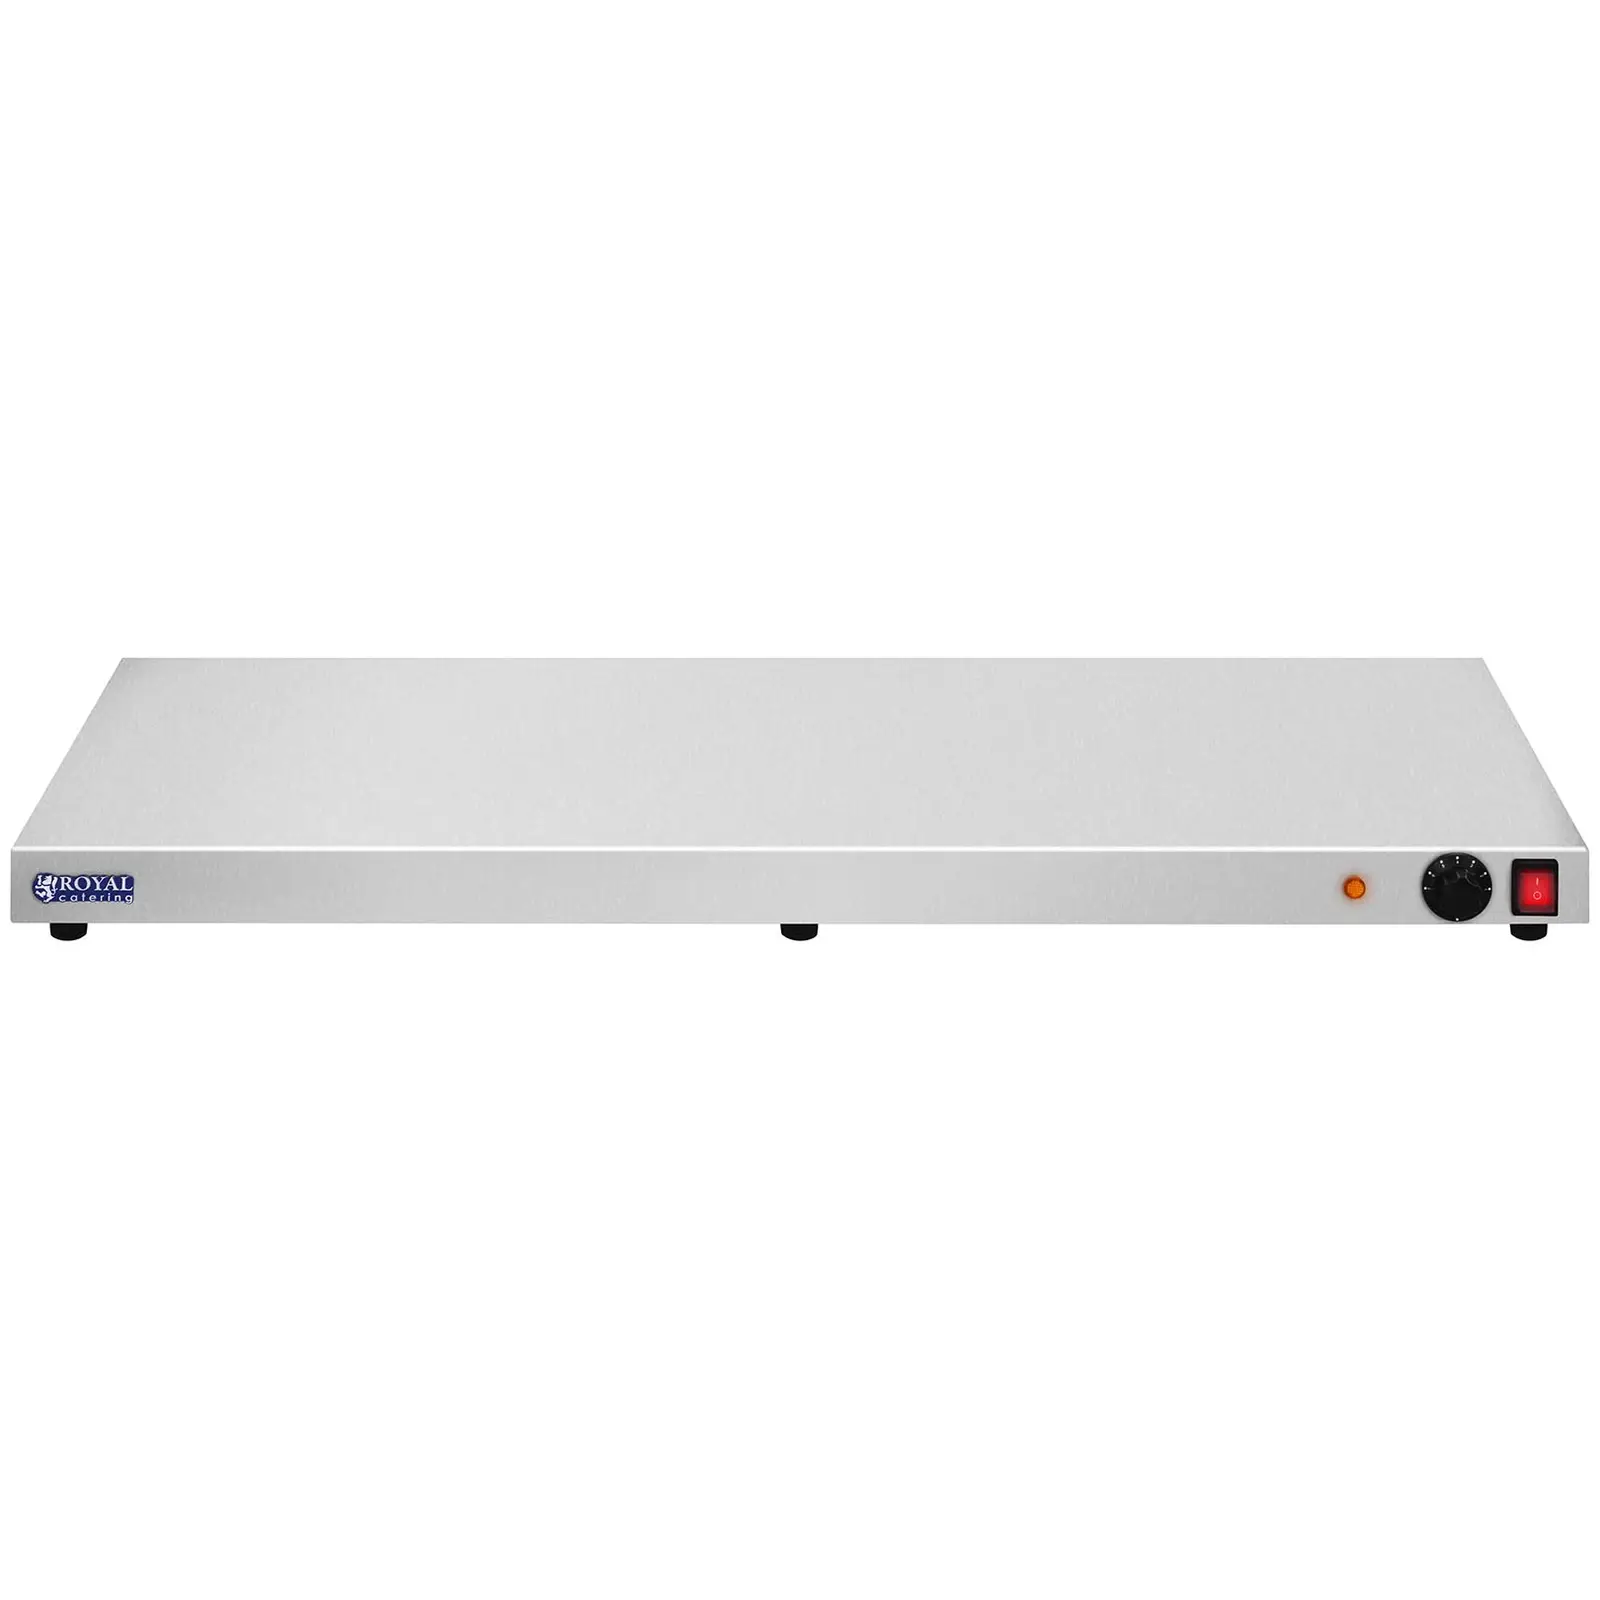 Stainless Steel Hot Tray - 600 Watts - 100 cm